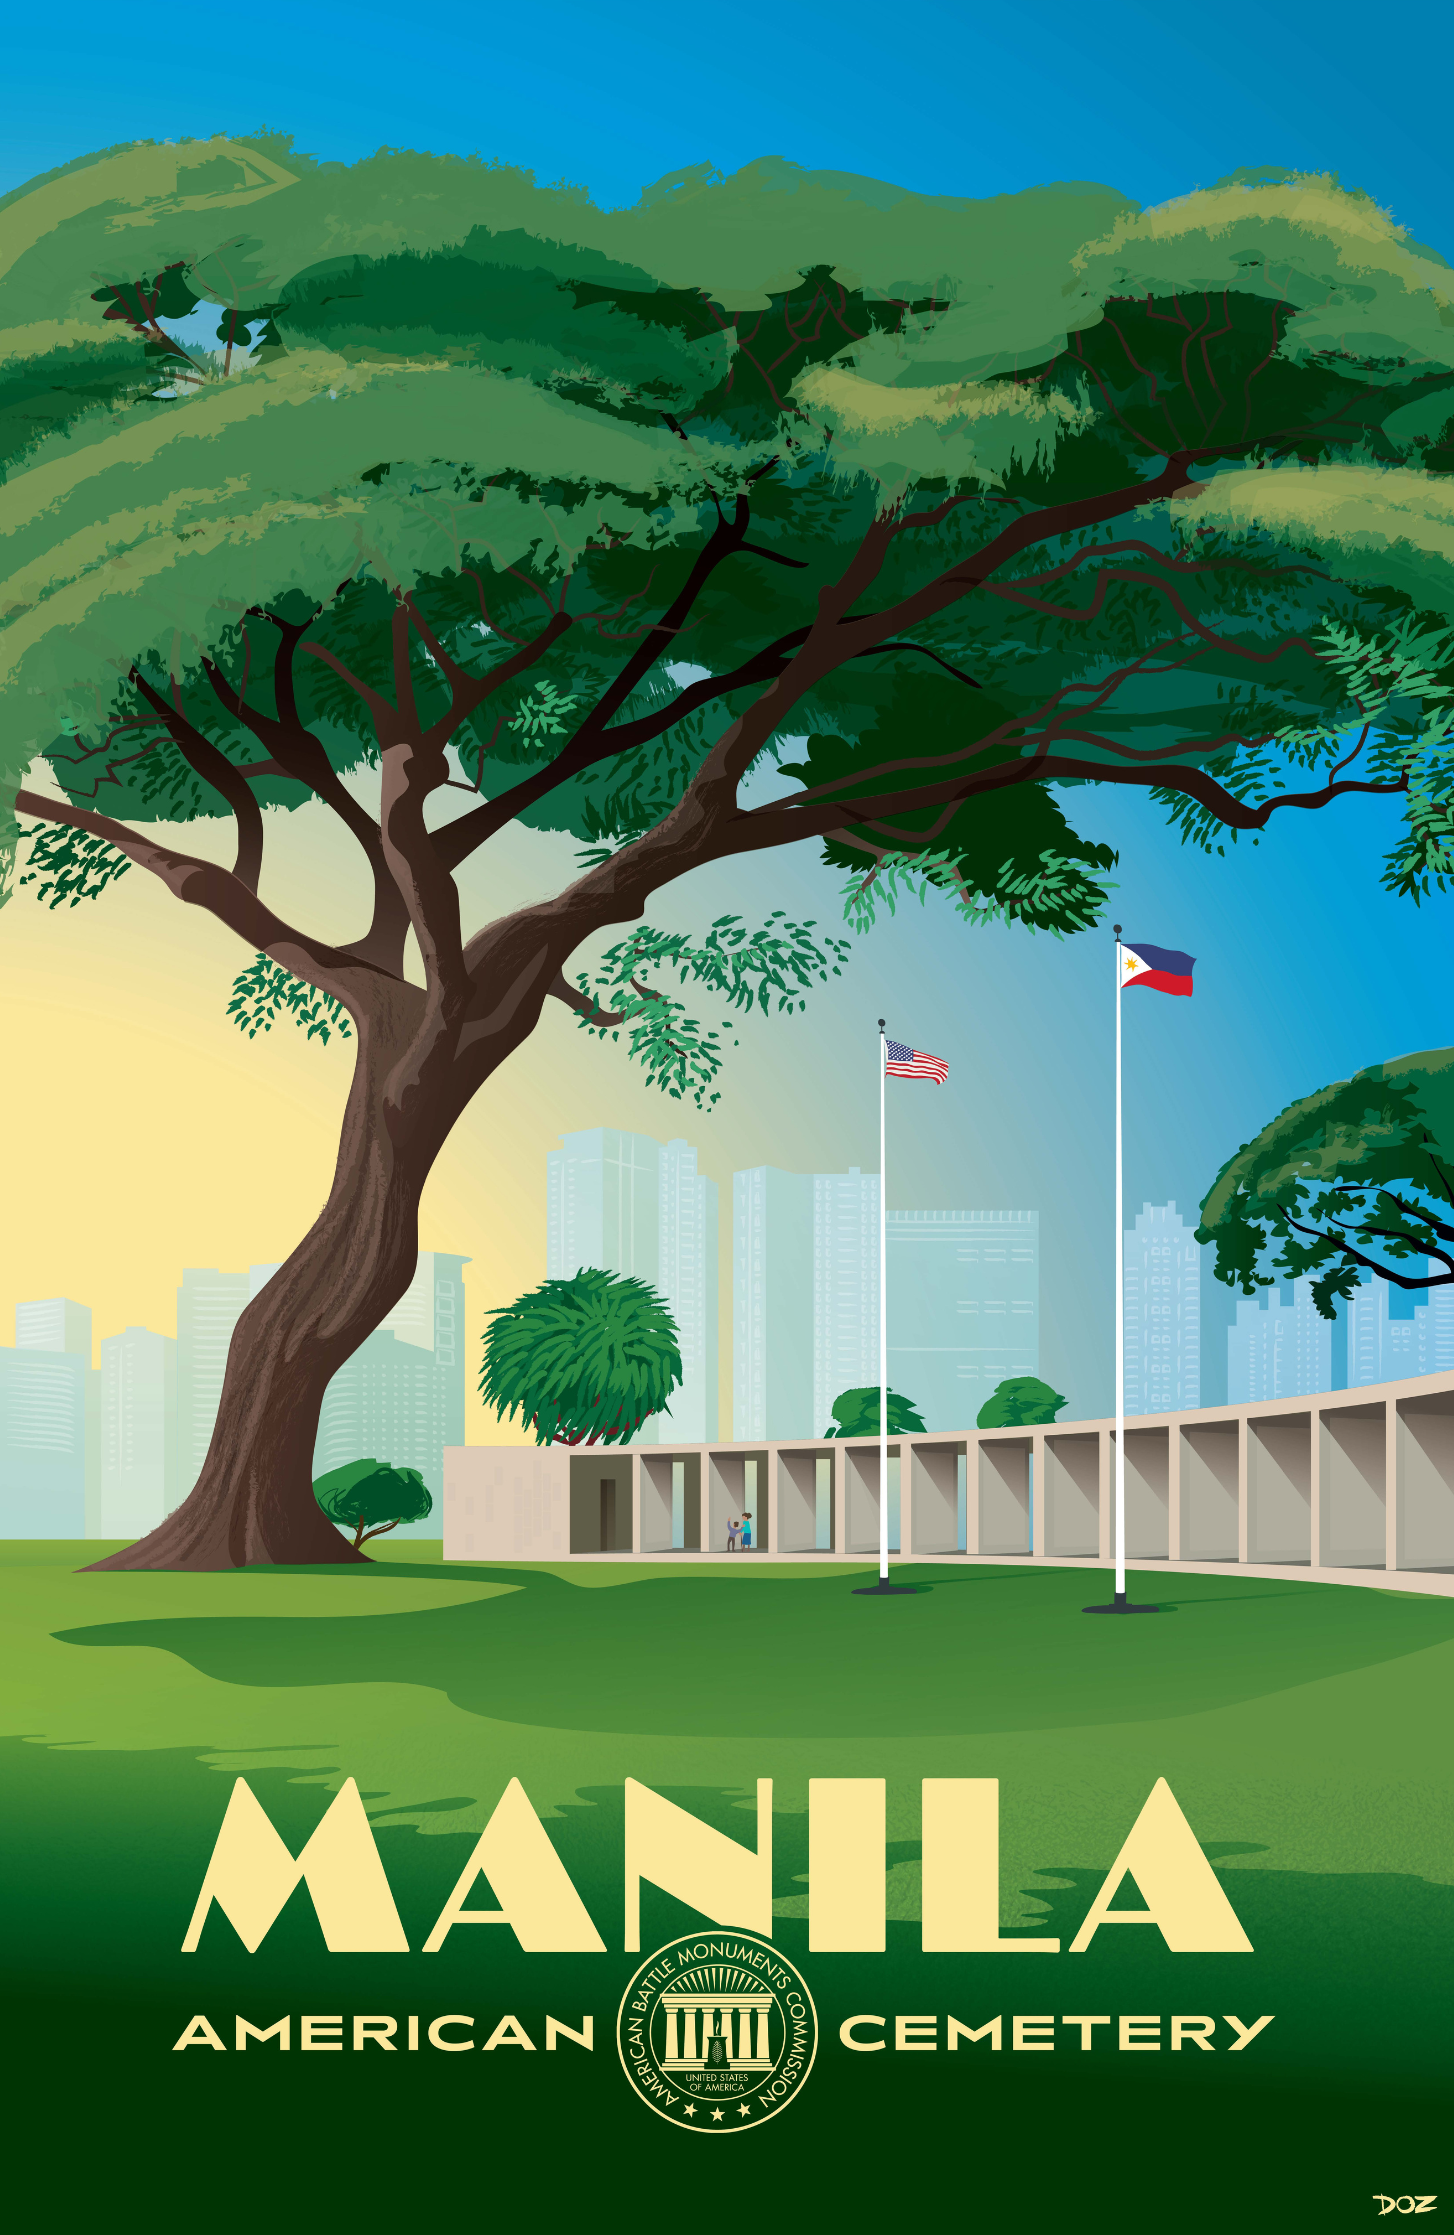 Vintage poster of Manila American Cemetery